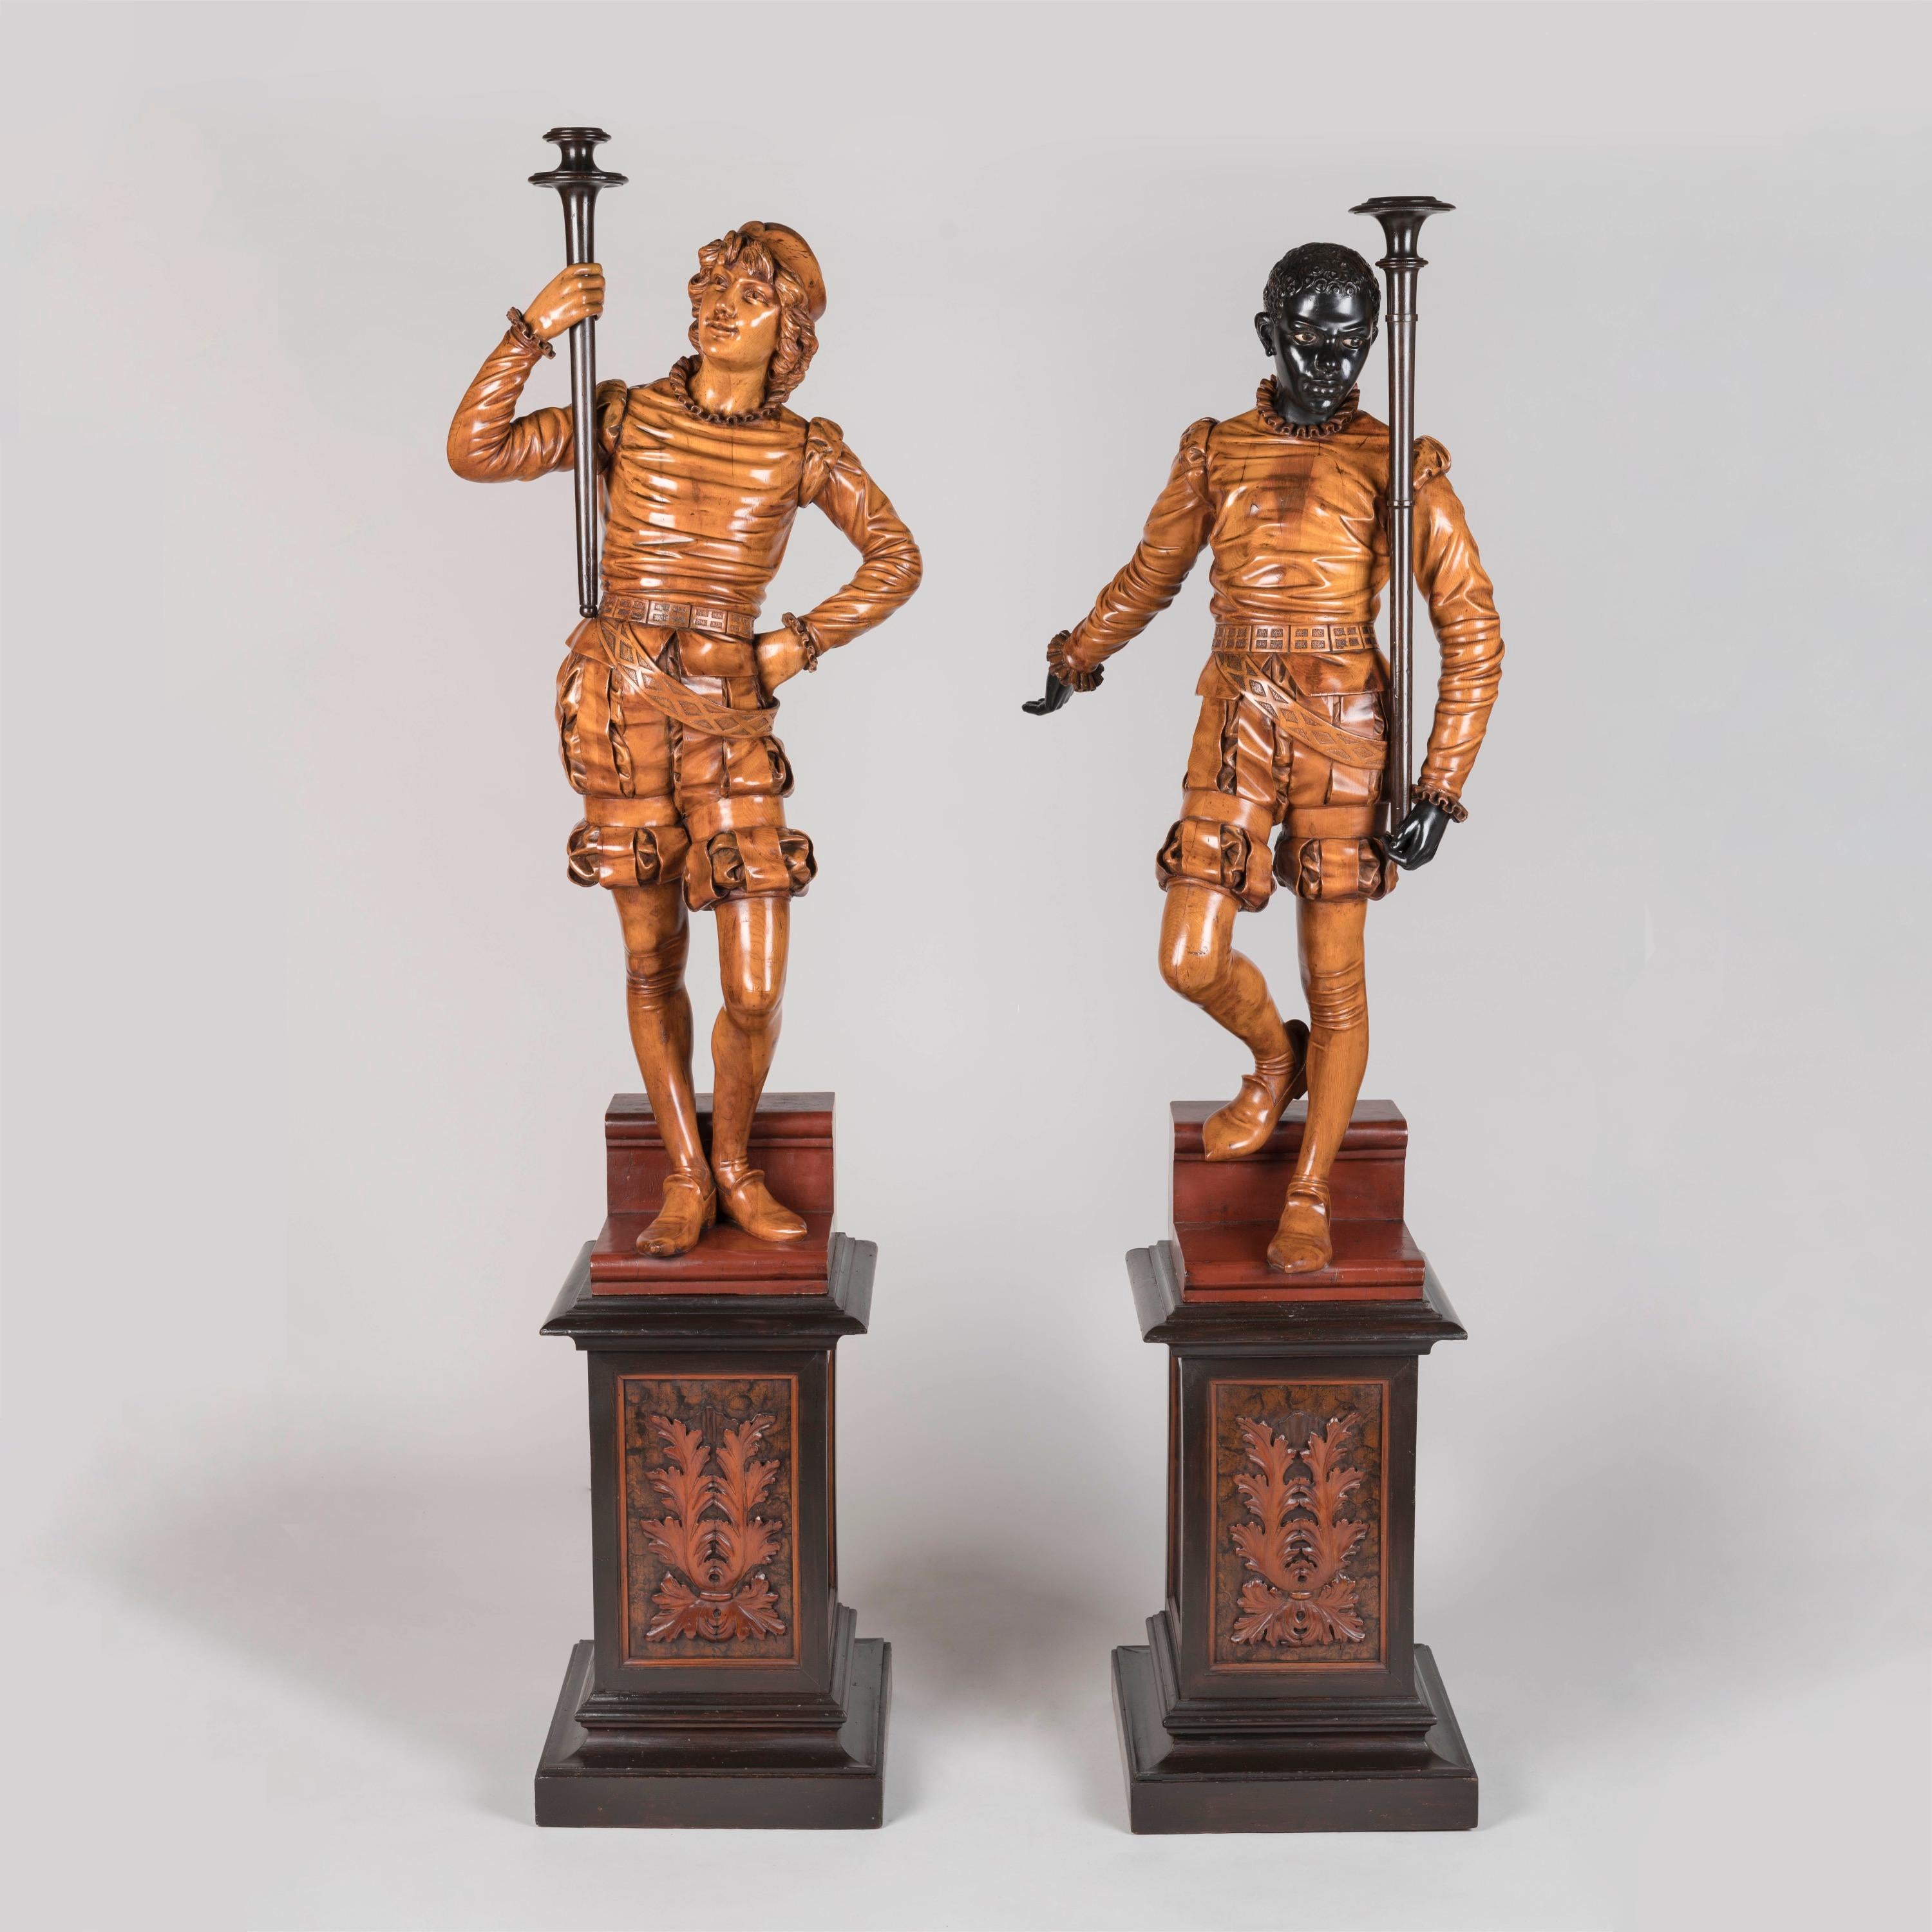 A Splendid Pair of Venetian Figural Torchères
Attributed to Valentino Panciera Besarel

Of solid carved pine, waxed, blackened and beeswax-polished throughout. Each figure carved with virtuosic realism, wearing identical Renaissance style garb